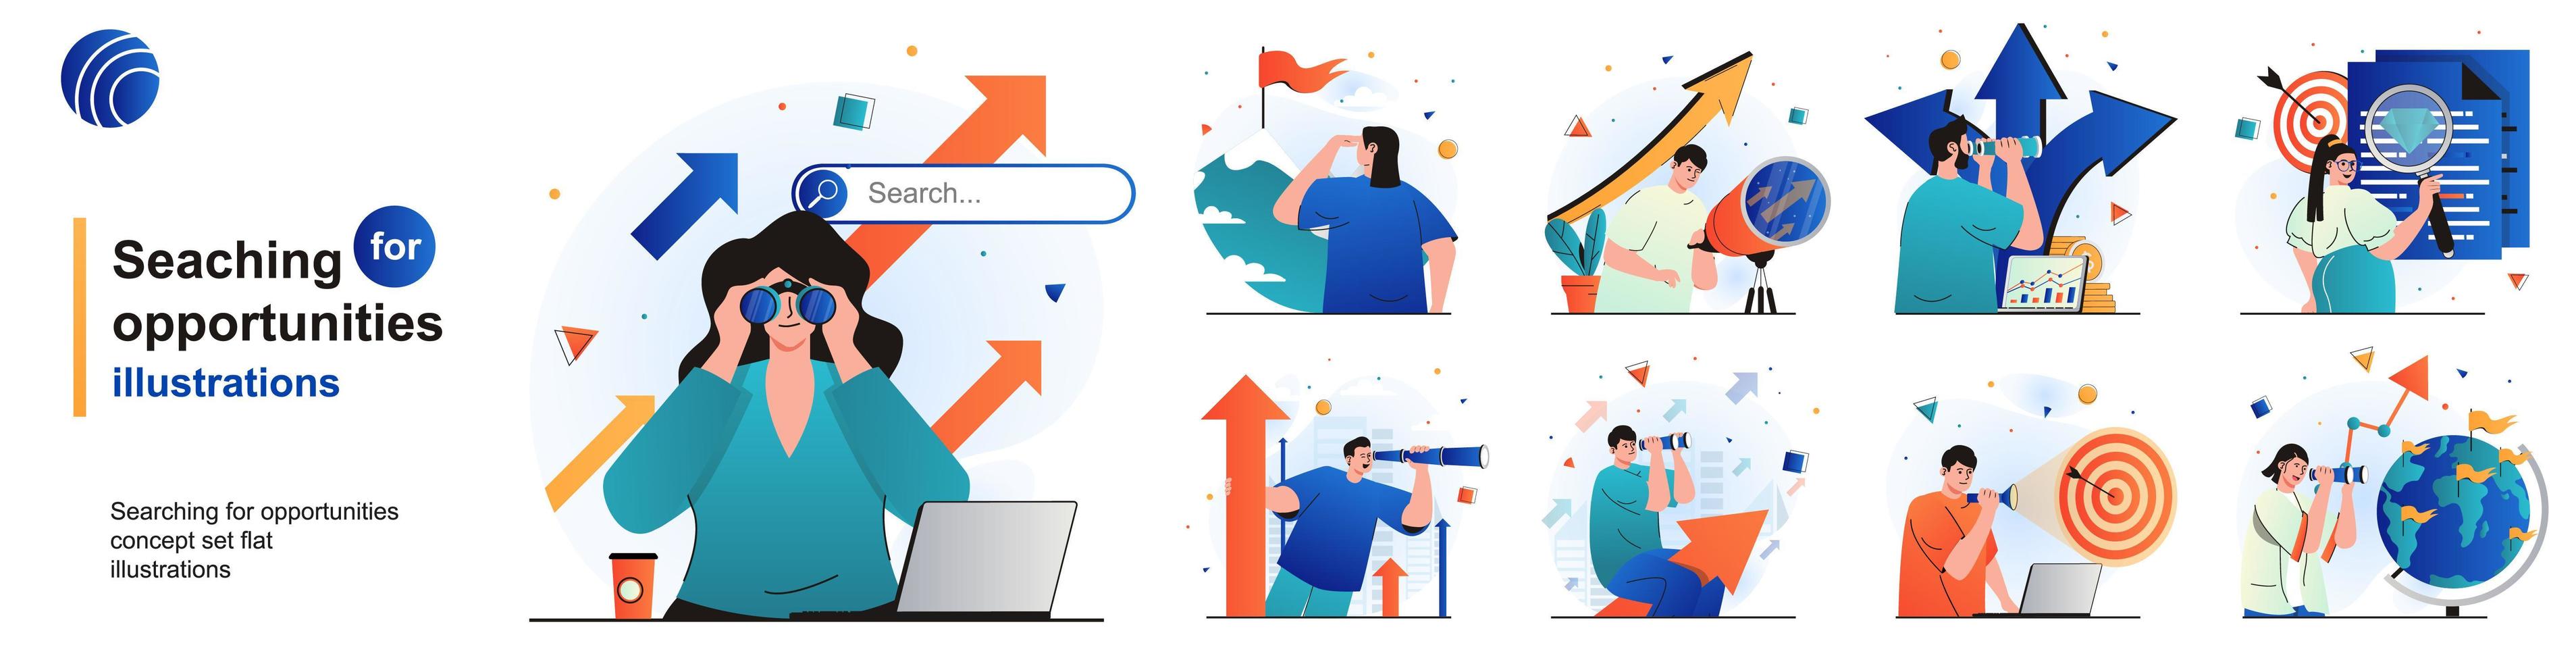 Searching for opportunities isolated set. Human resources and HR management. People collection of scenes in flat design. Vector illustration for blogging, website, mobile app, promotional materials.